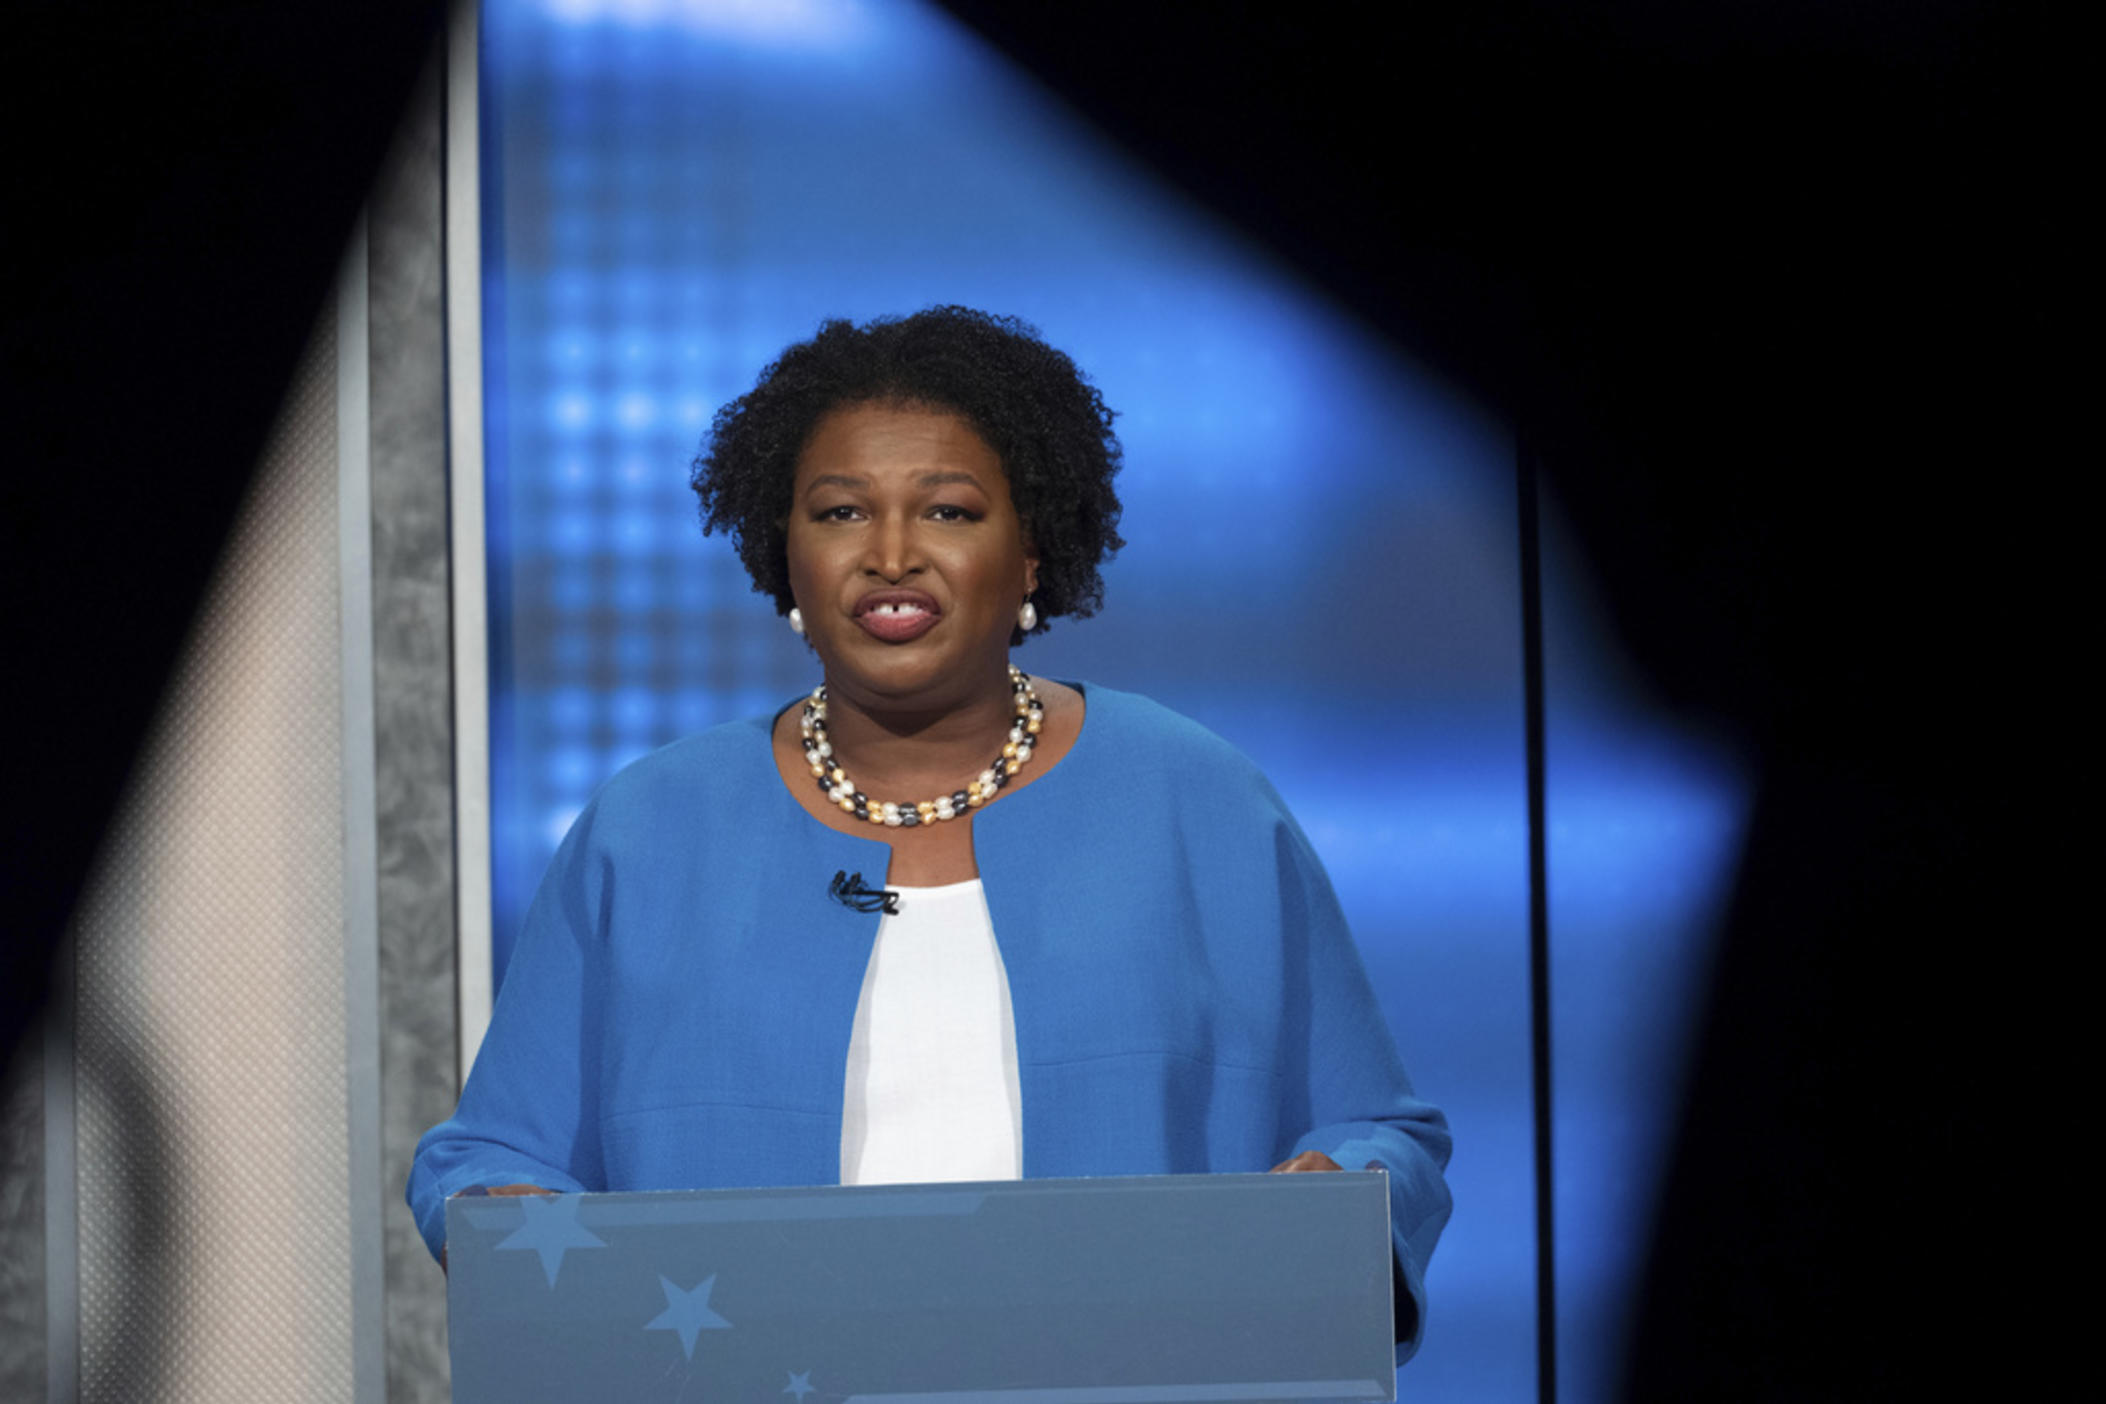 Democratic challenger Stacey Abrams faces off with Republican Georgia Gov. Brian Kemp in a televised debate, Oct. 30, 2022, in Atlanta. A lawsuit that plaintiffs say could deter mass voter challenges around the country ahead of the 2024 election is headed to trial in Georgia on Thursday, Oct. 26, 2023. A group associated with Abrams accuses Texas-based True the Vote of trying to intimidate voters ahead of a 2021 Senate runoff election in Georgia.